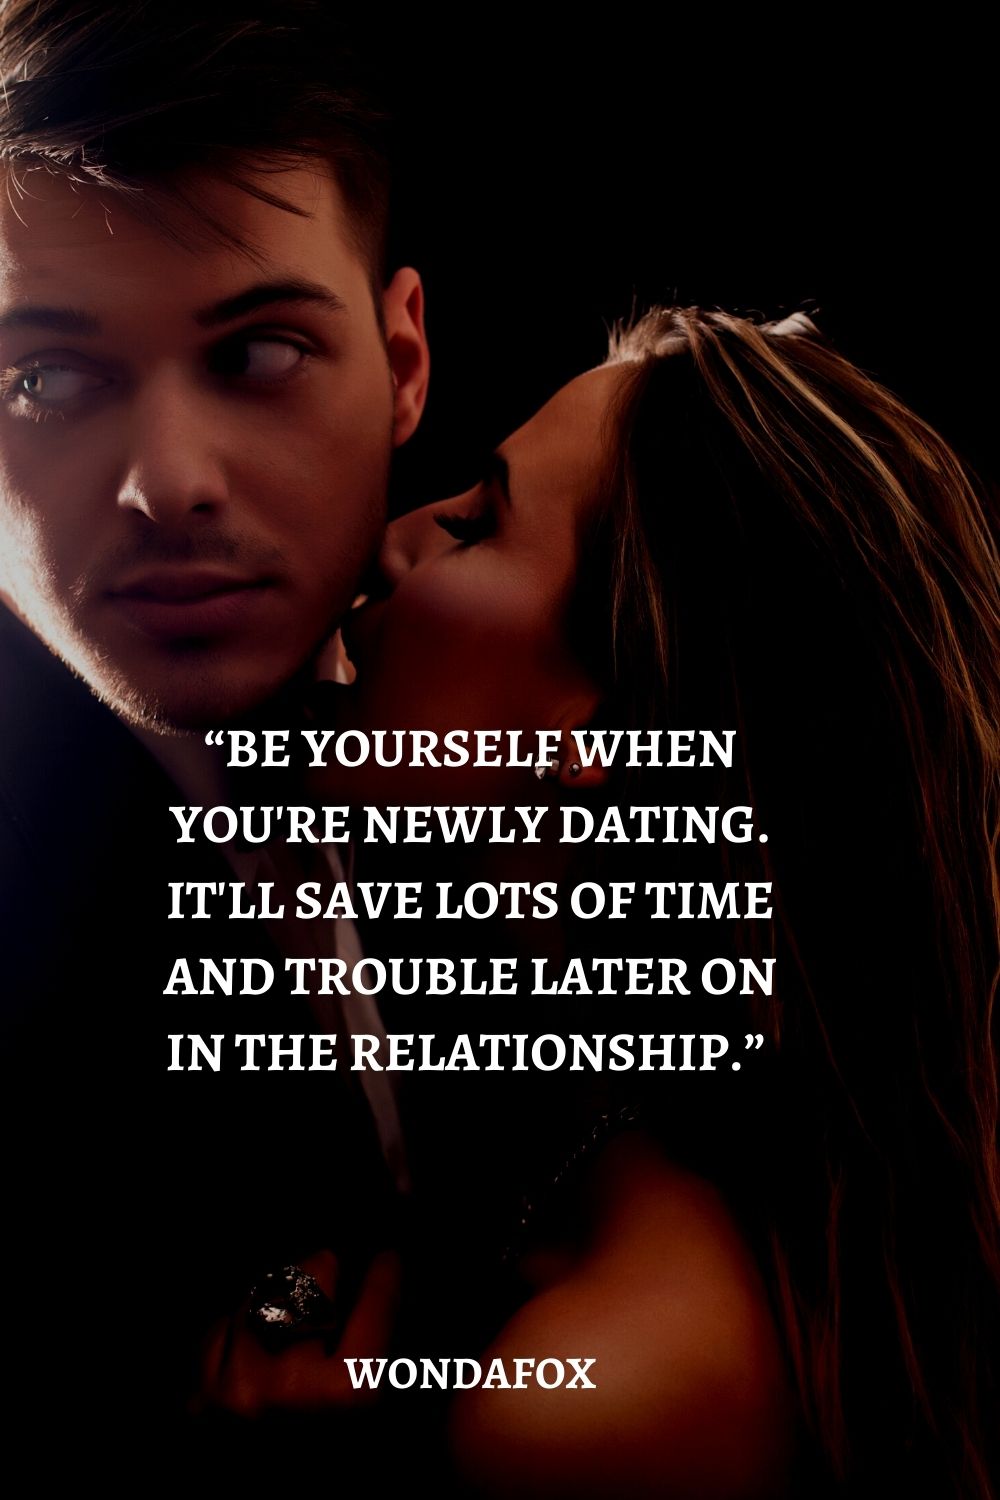 “Be yourself when you're newly dating. It'll save lots of time and trouble later on in the relationship.” 